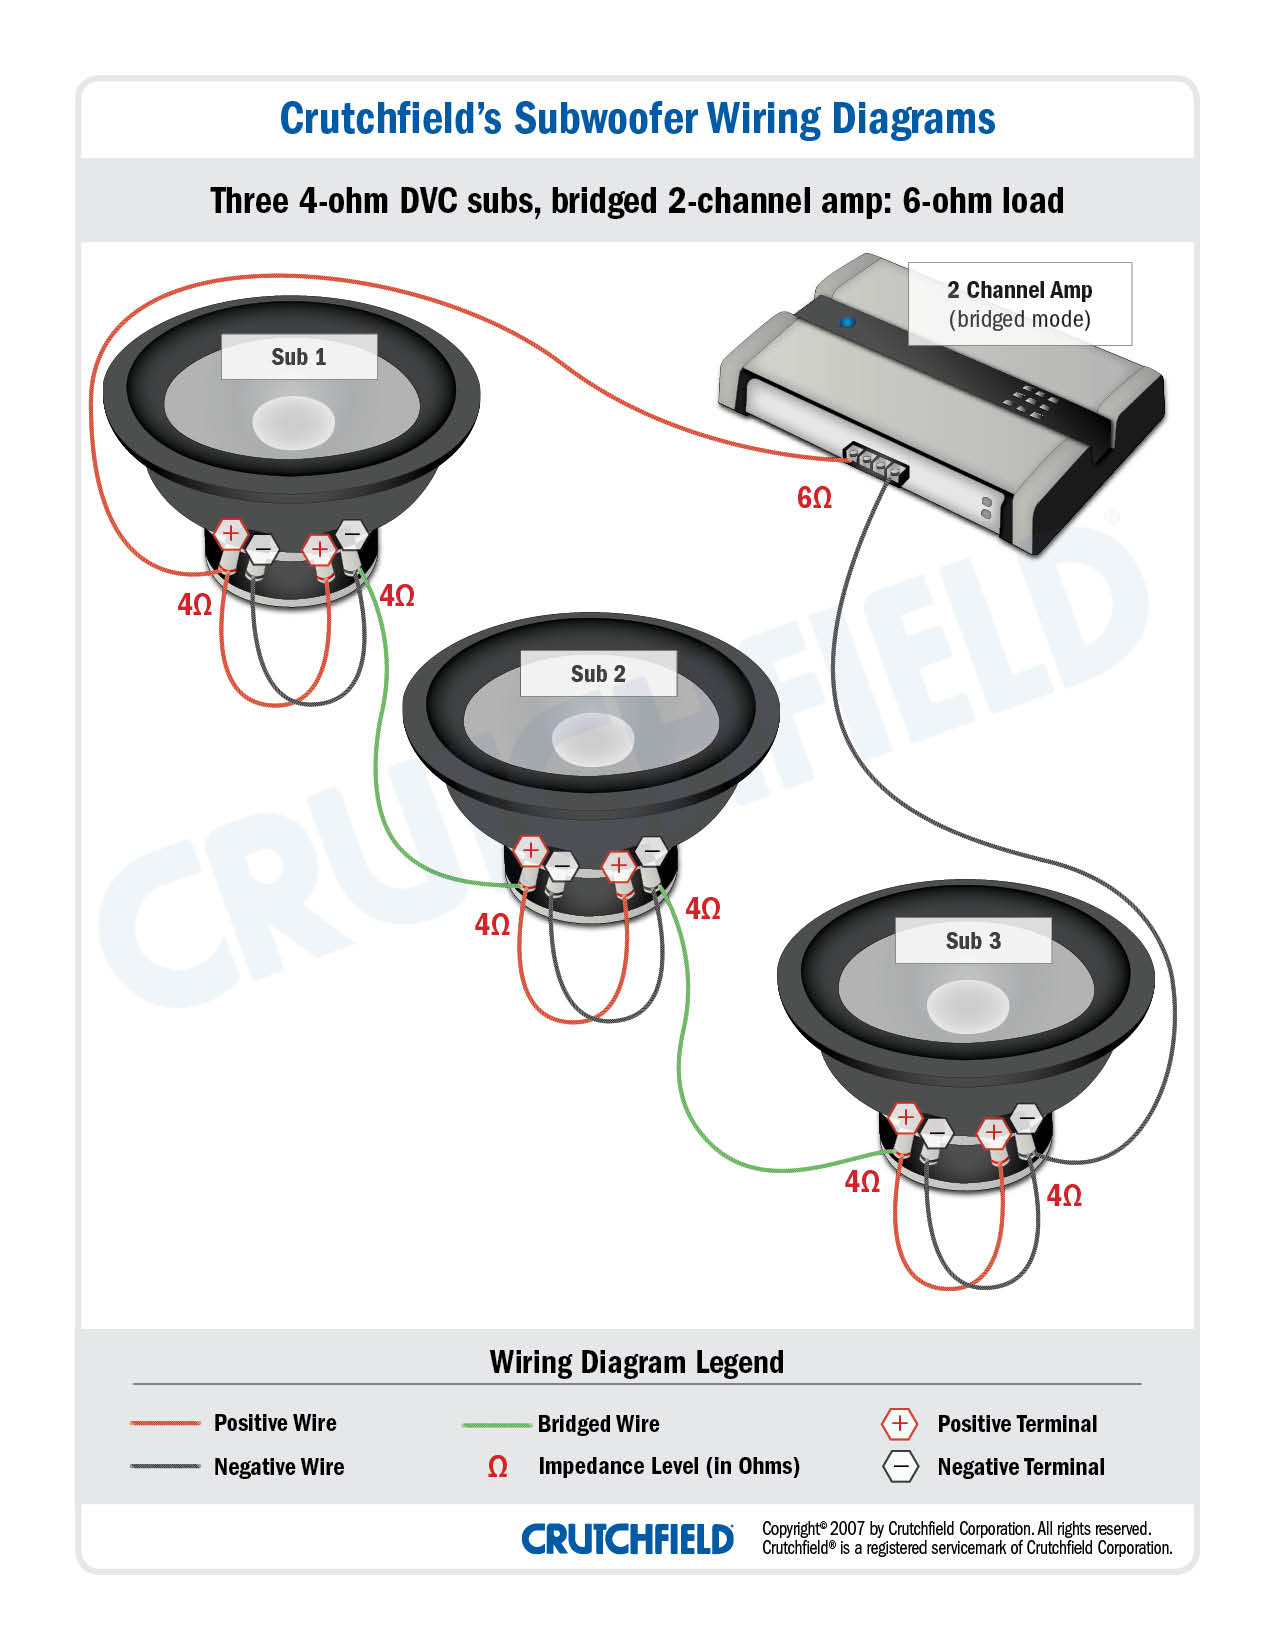 Subwoofer Wiring Diagrams — How To Wire Your Subs - Center Channel Speaker Wiring Diagram